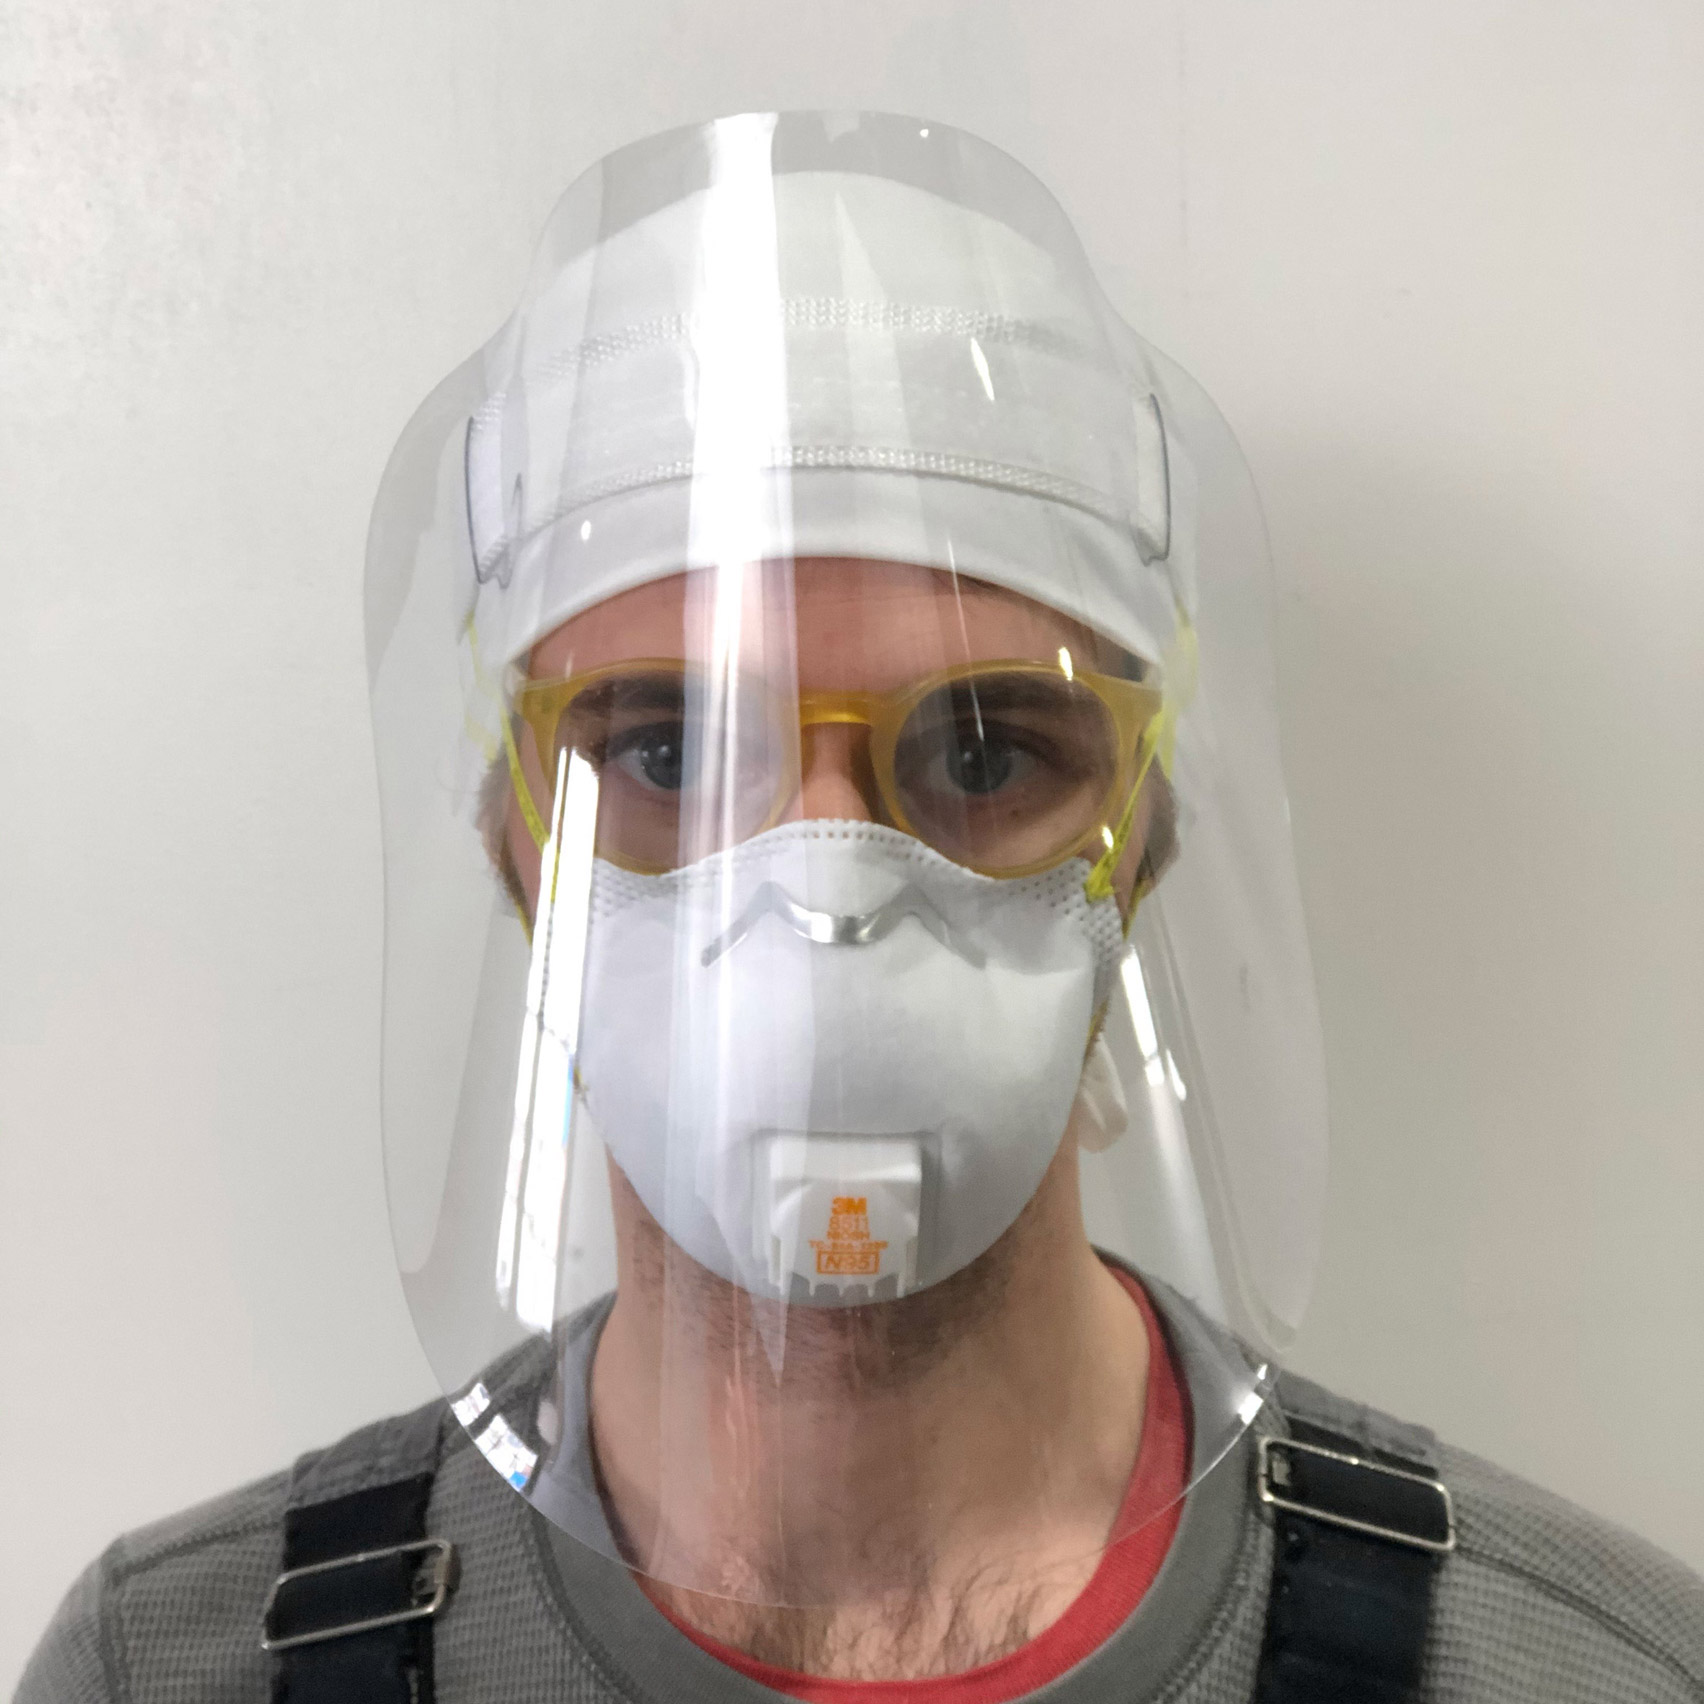 Seven face shields created to protect coronavirus health care workers